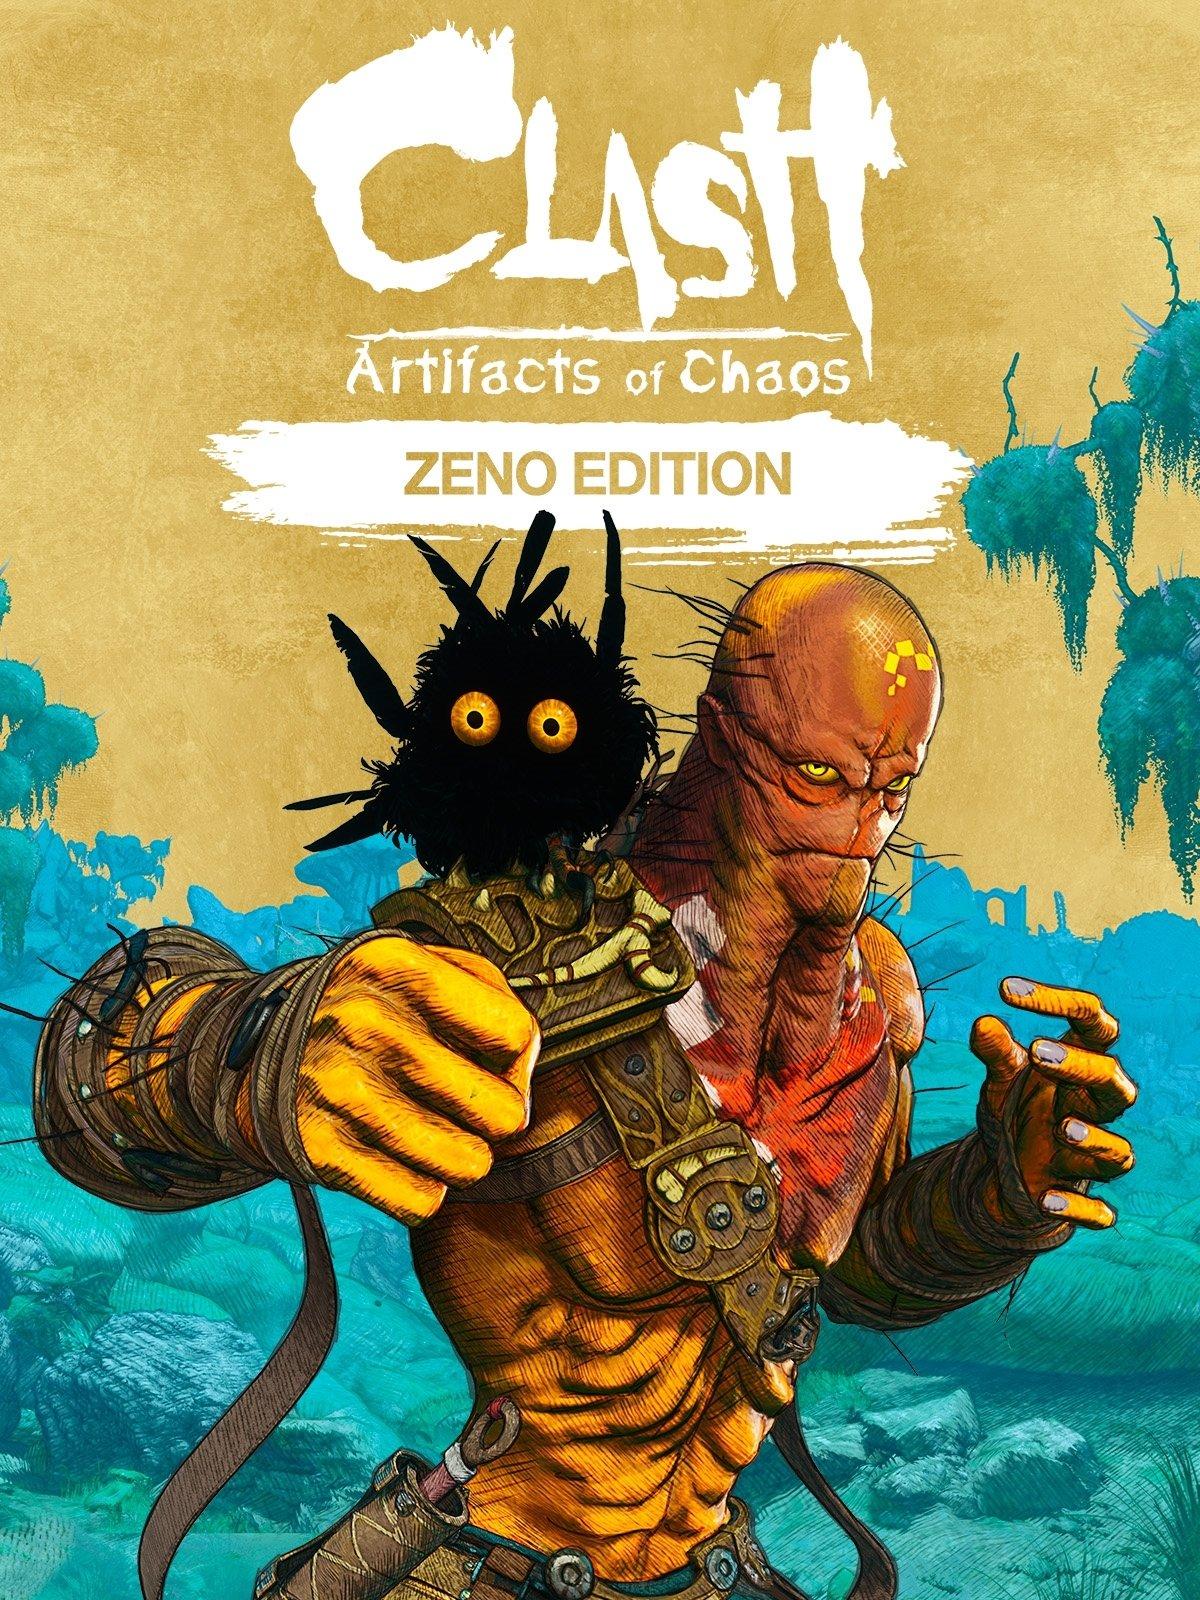 Clash: Artifacts of Chaos - Zeno Edition | ROW 1 (bf77eee3-d896-497a-9253-66776c355566)